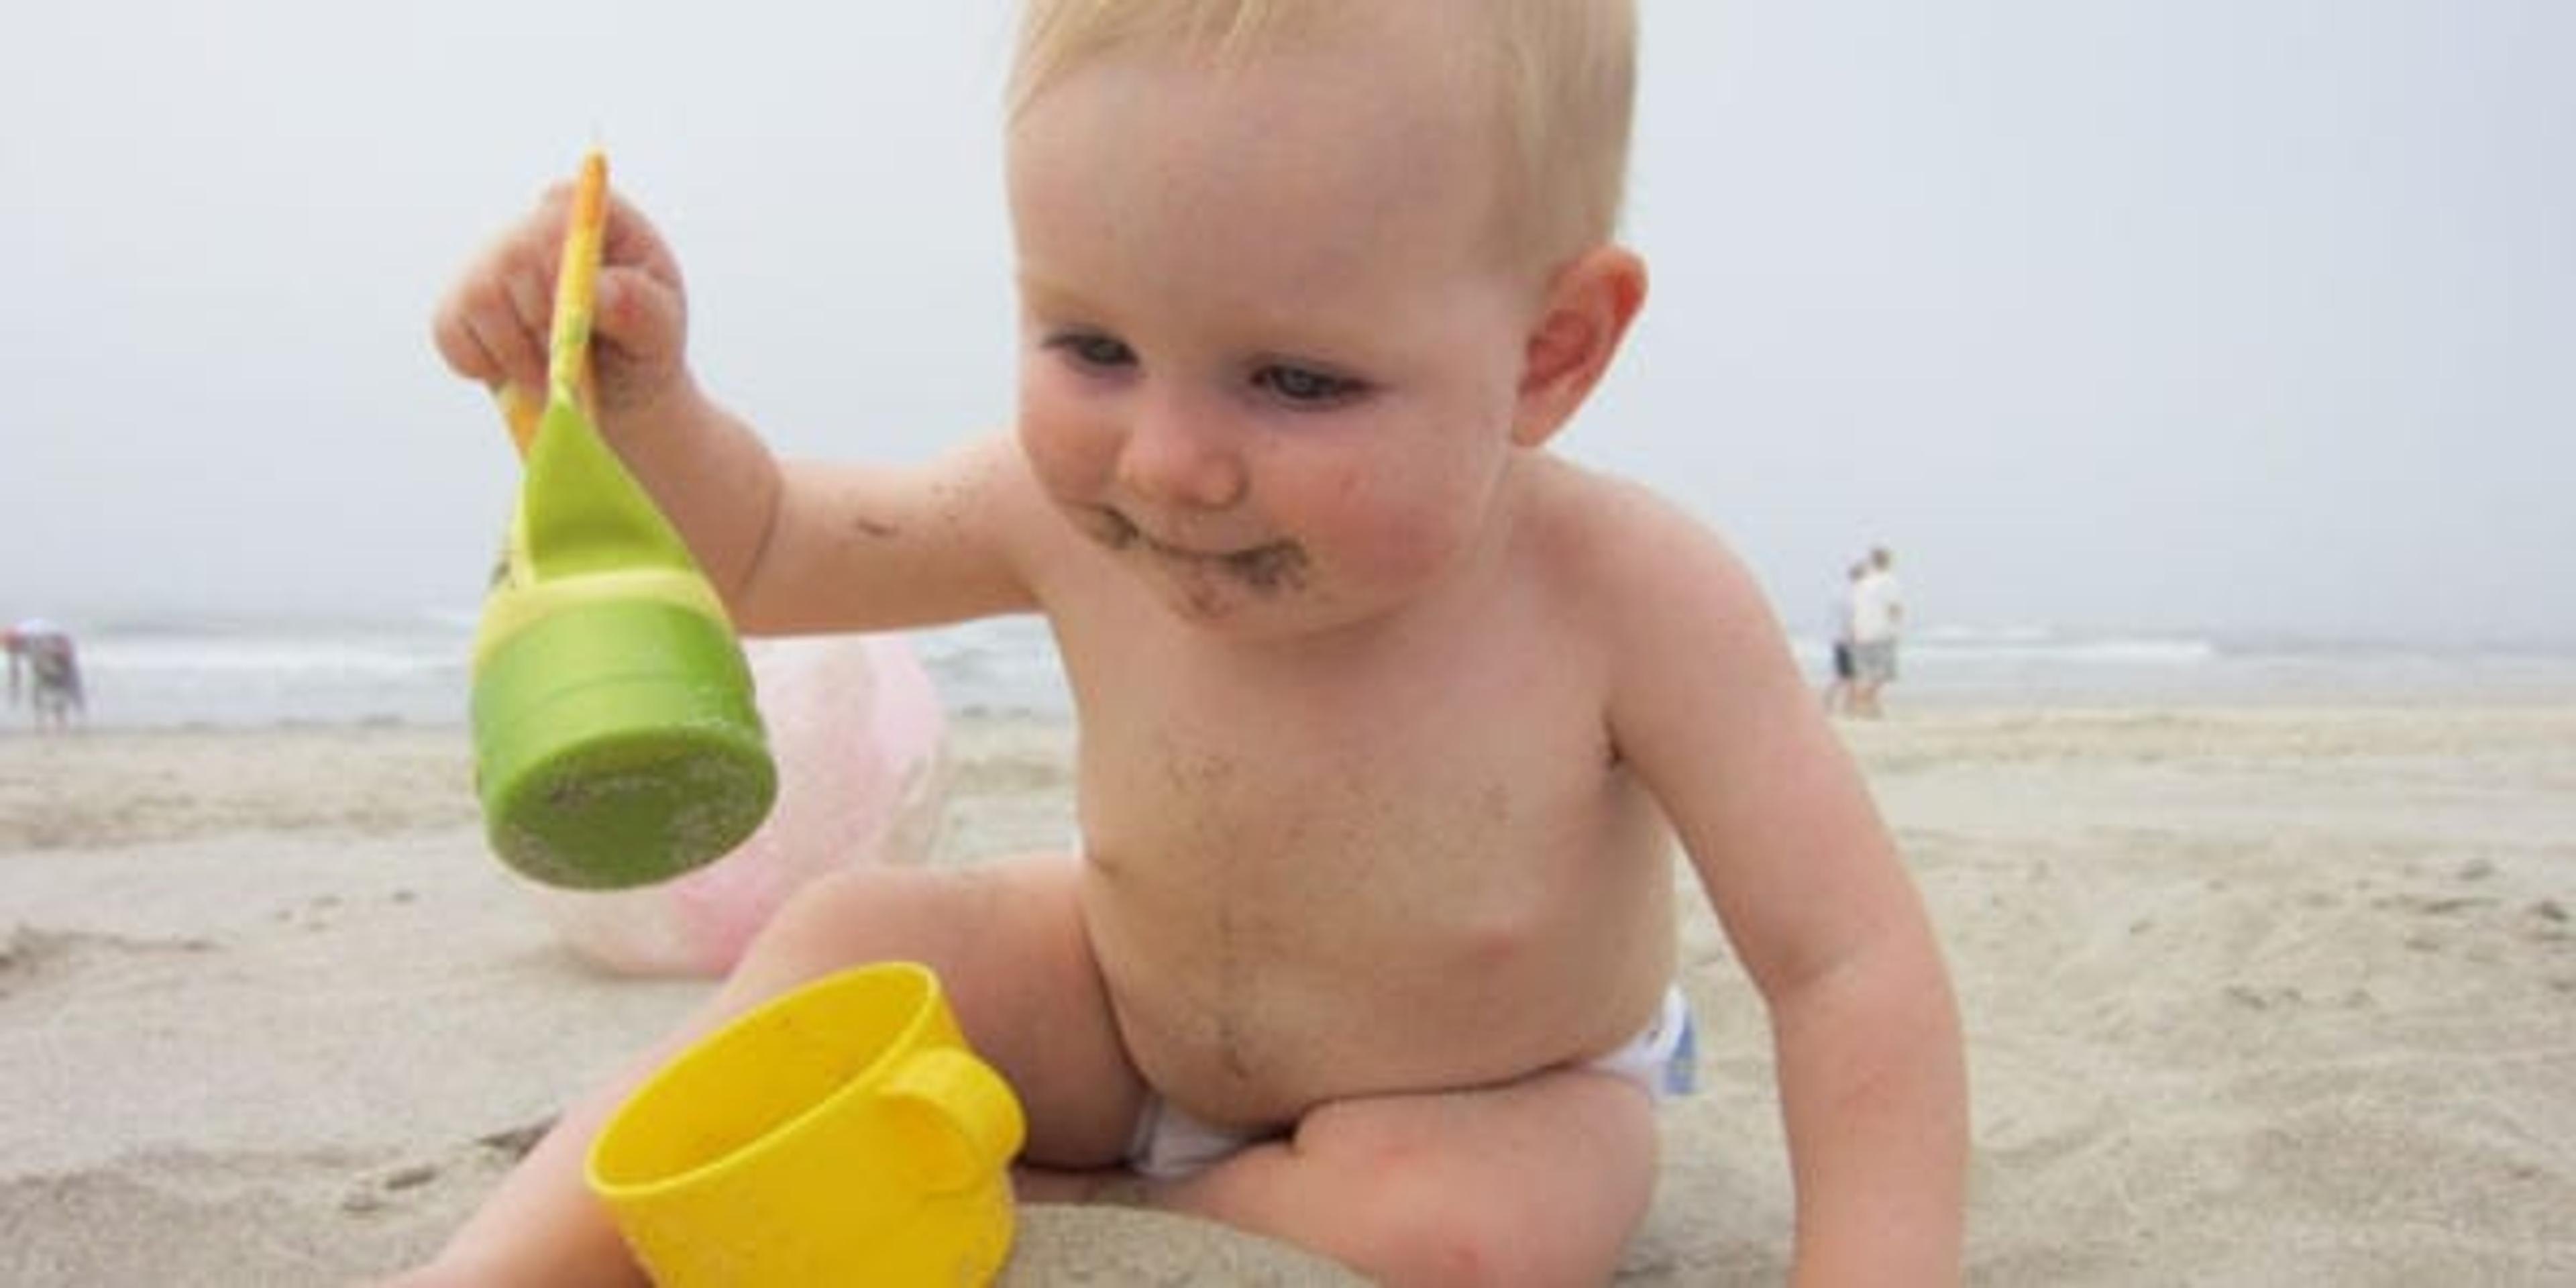 Image of a baby playing on the beach with sand toys.